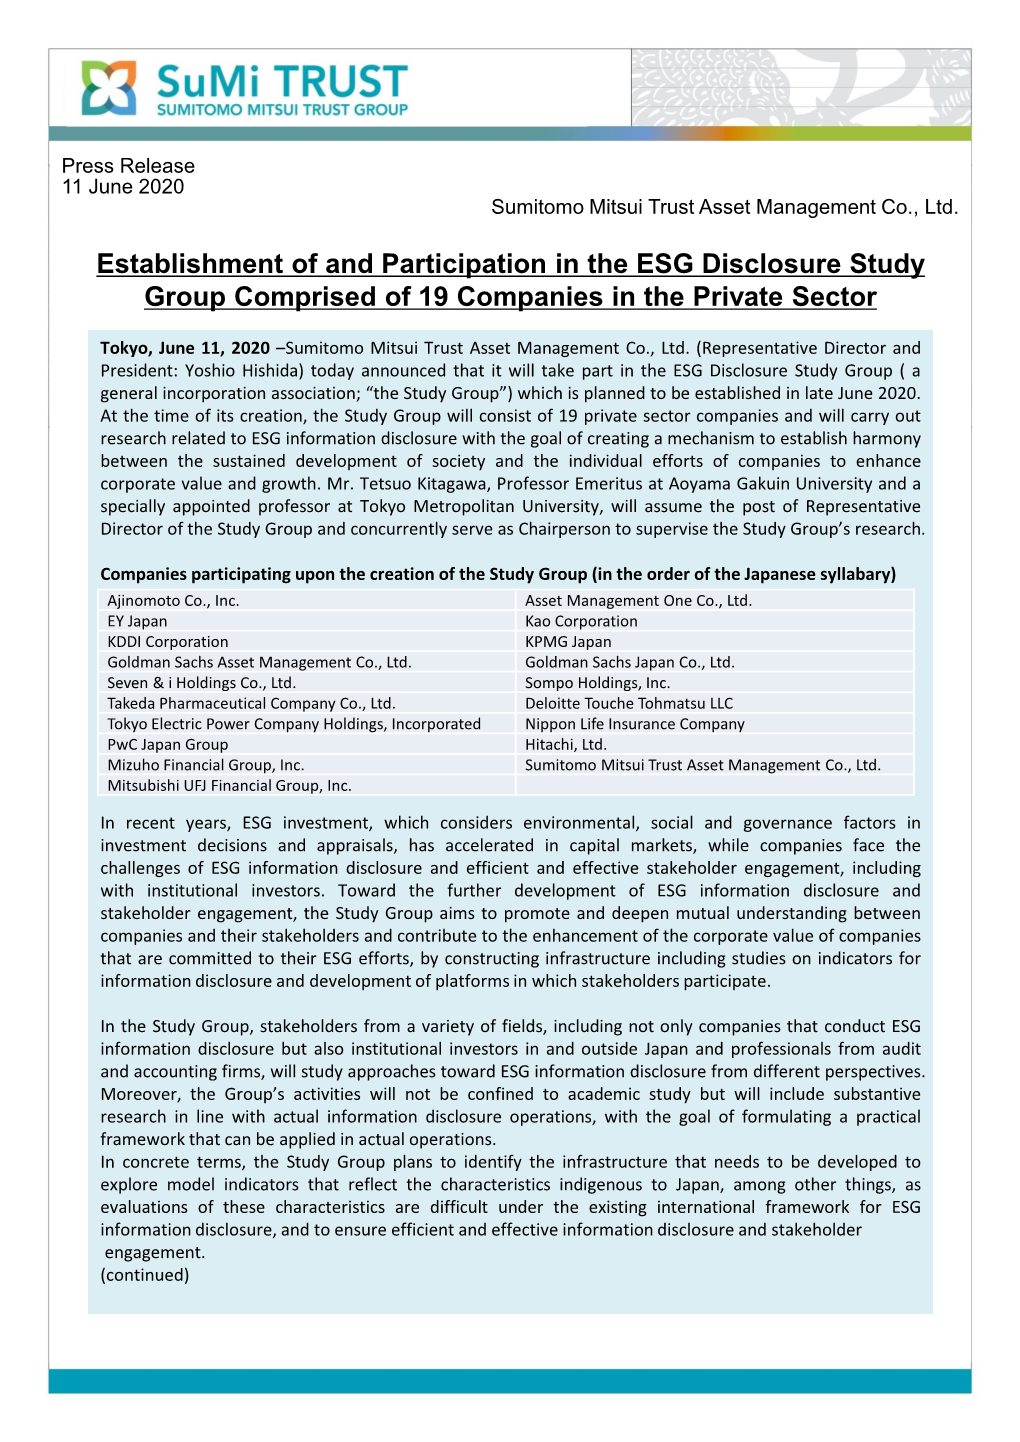 Establishment of and Participation in the ESG Disclosure Study Group Comprised of 19 Companies in the Private Sector